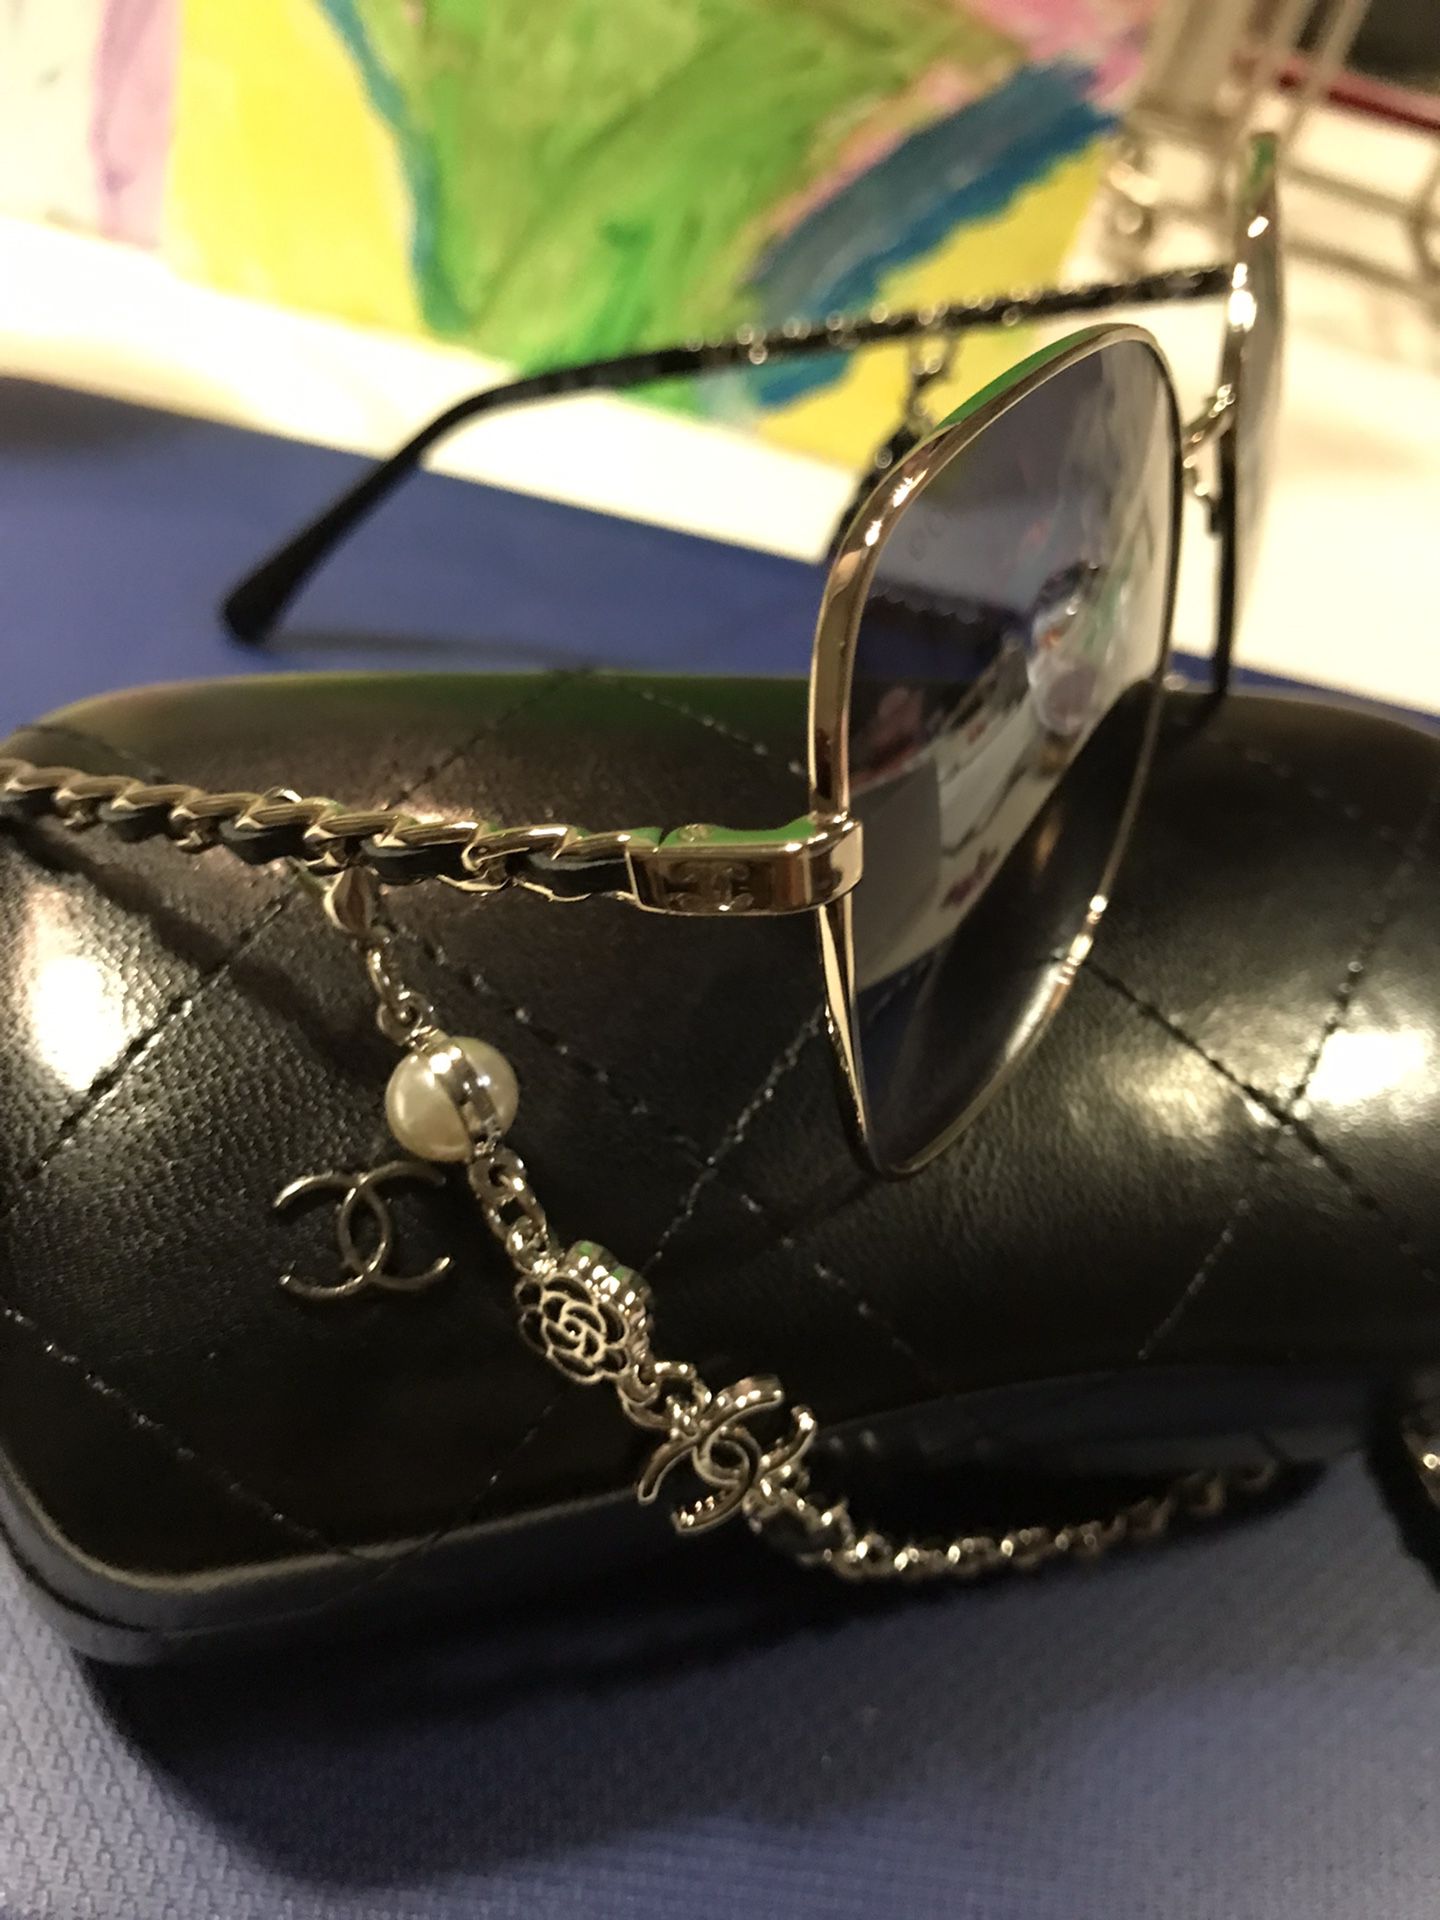 CHANEL SUNGLASSES for Sale in Tampa, FL - OfferUp